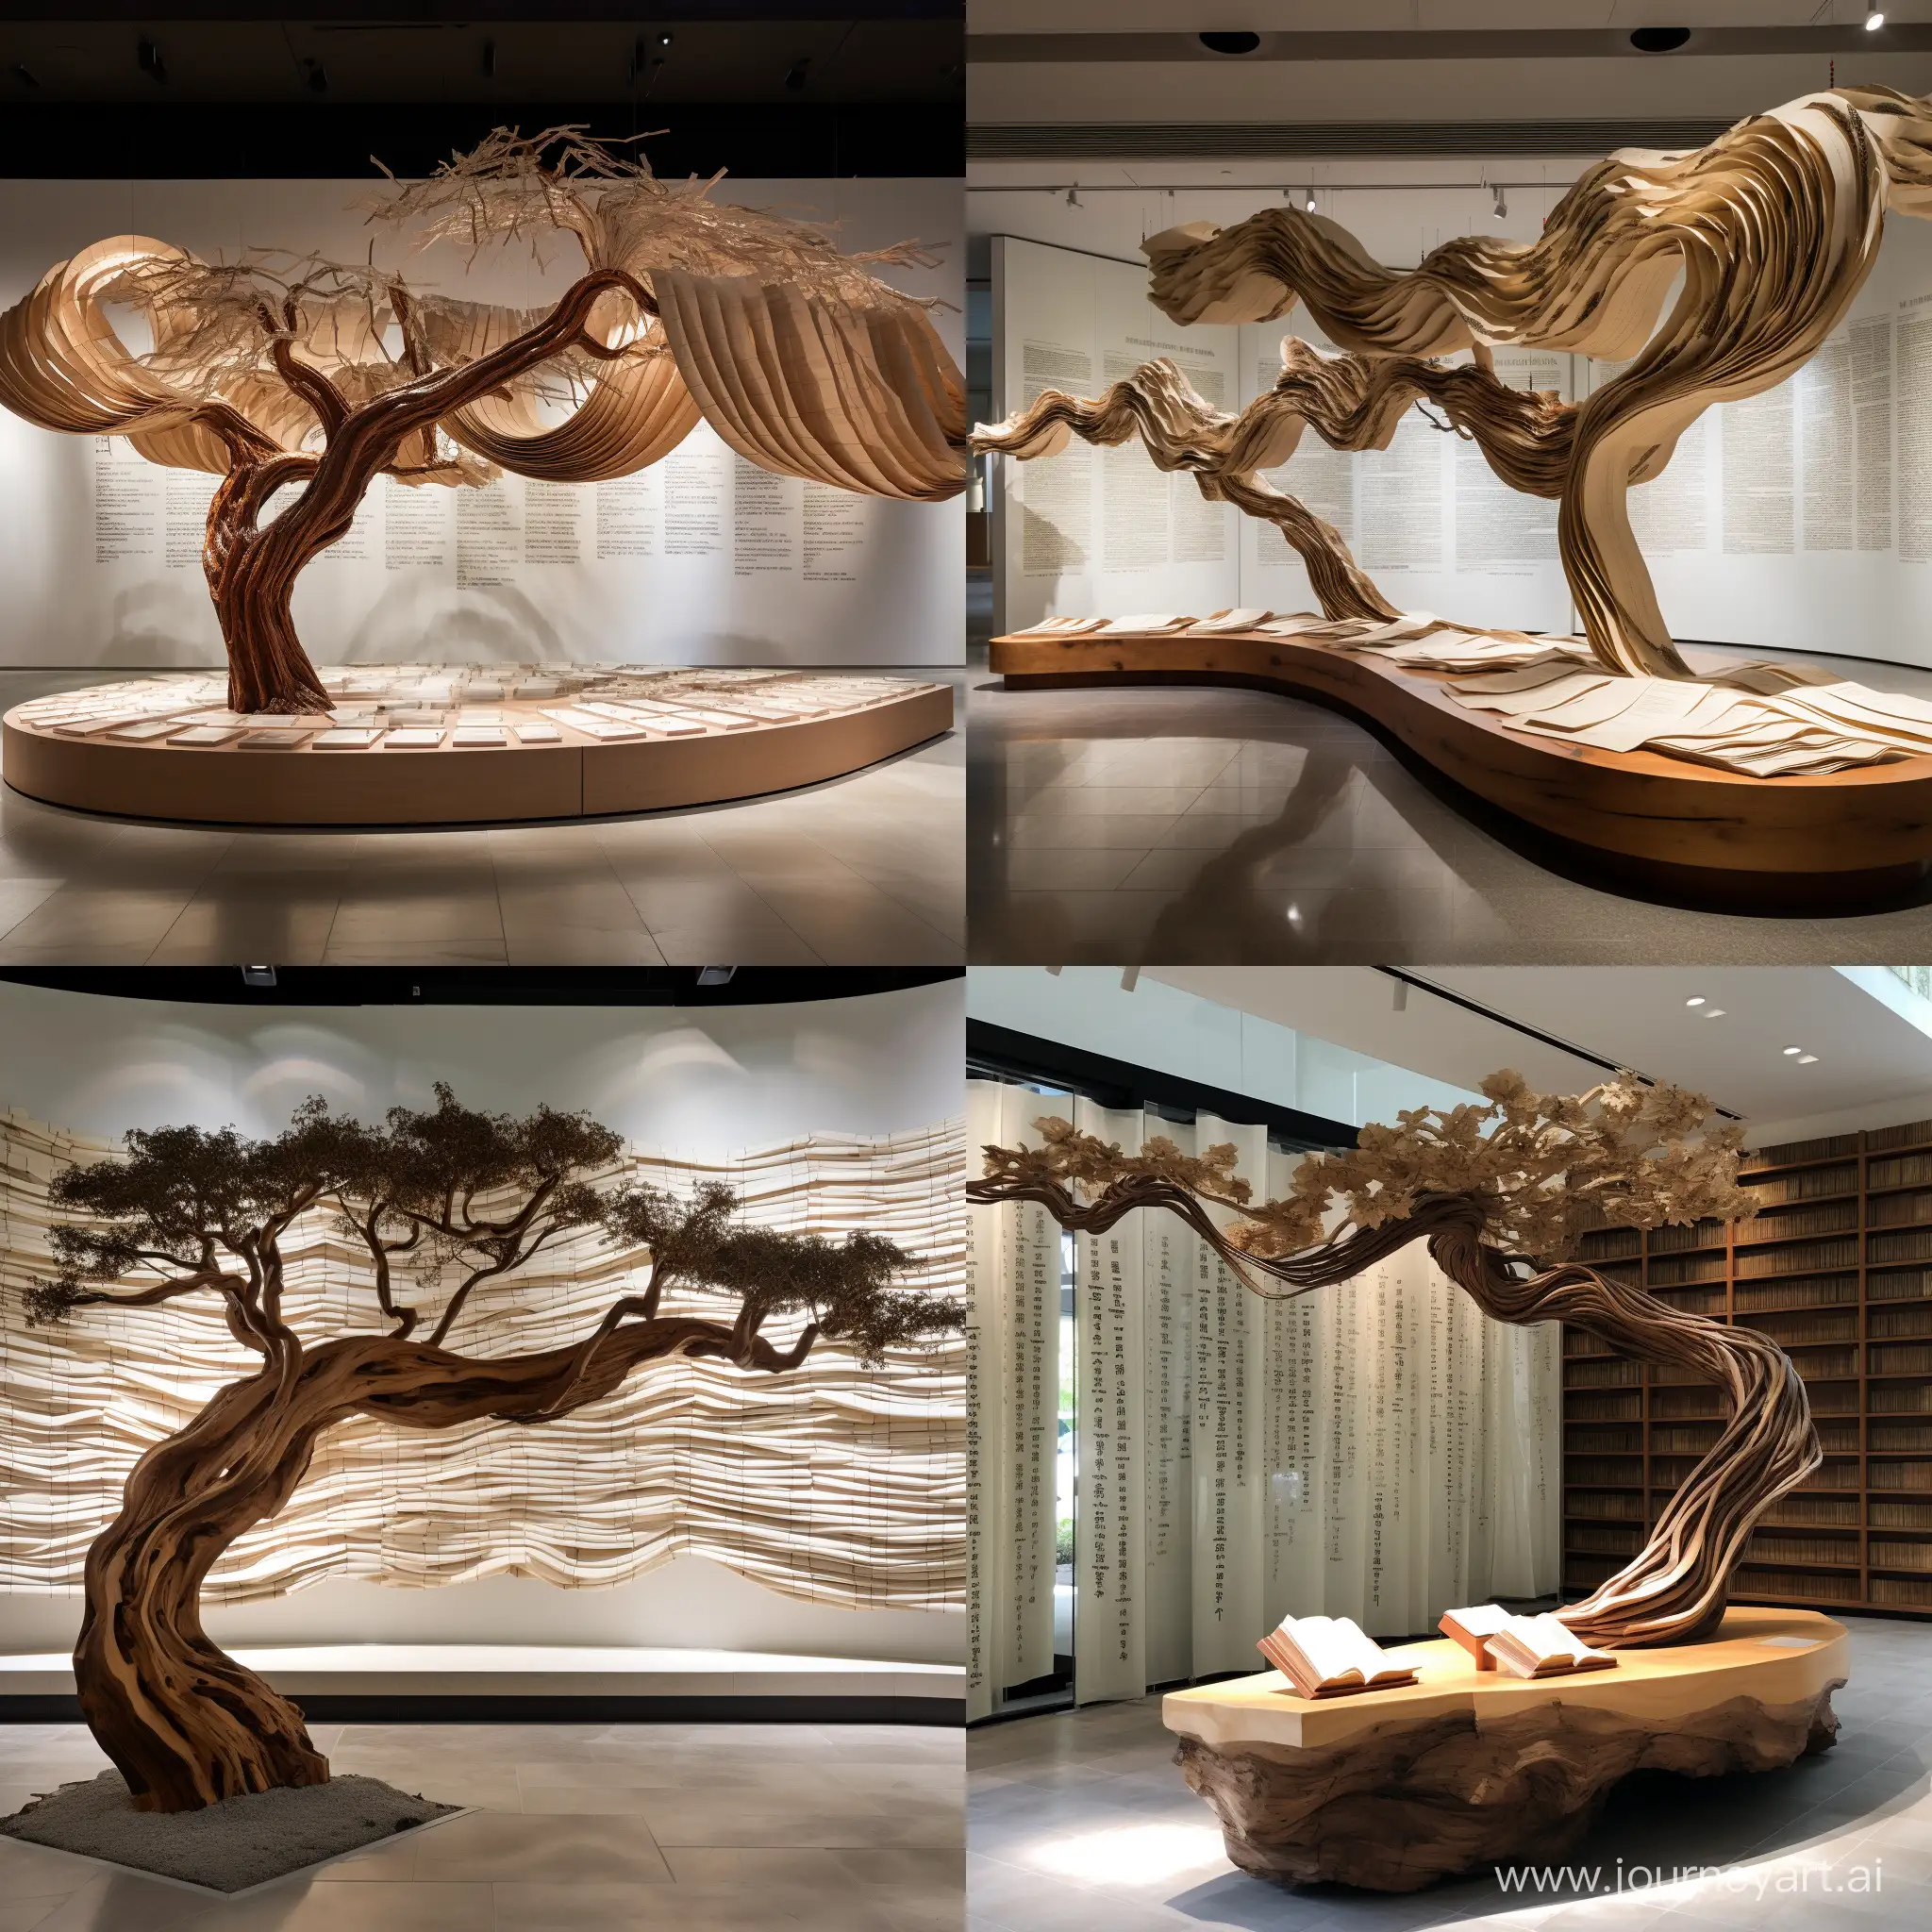 On the front, with a white background, a row of unfolded Chinese bamboo slips stands on the ground with 10 sheet shaped strips, made of brown stone material. The strips are filled with Chinese poetry and prose. On the left side of the bar, in front of it is a stone sculpture of a tree. The tree roots transform into wave sculptures flowing horizontally on the right side.